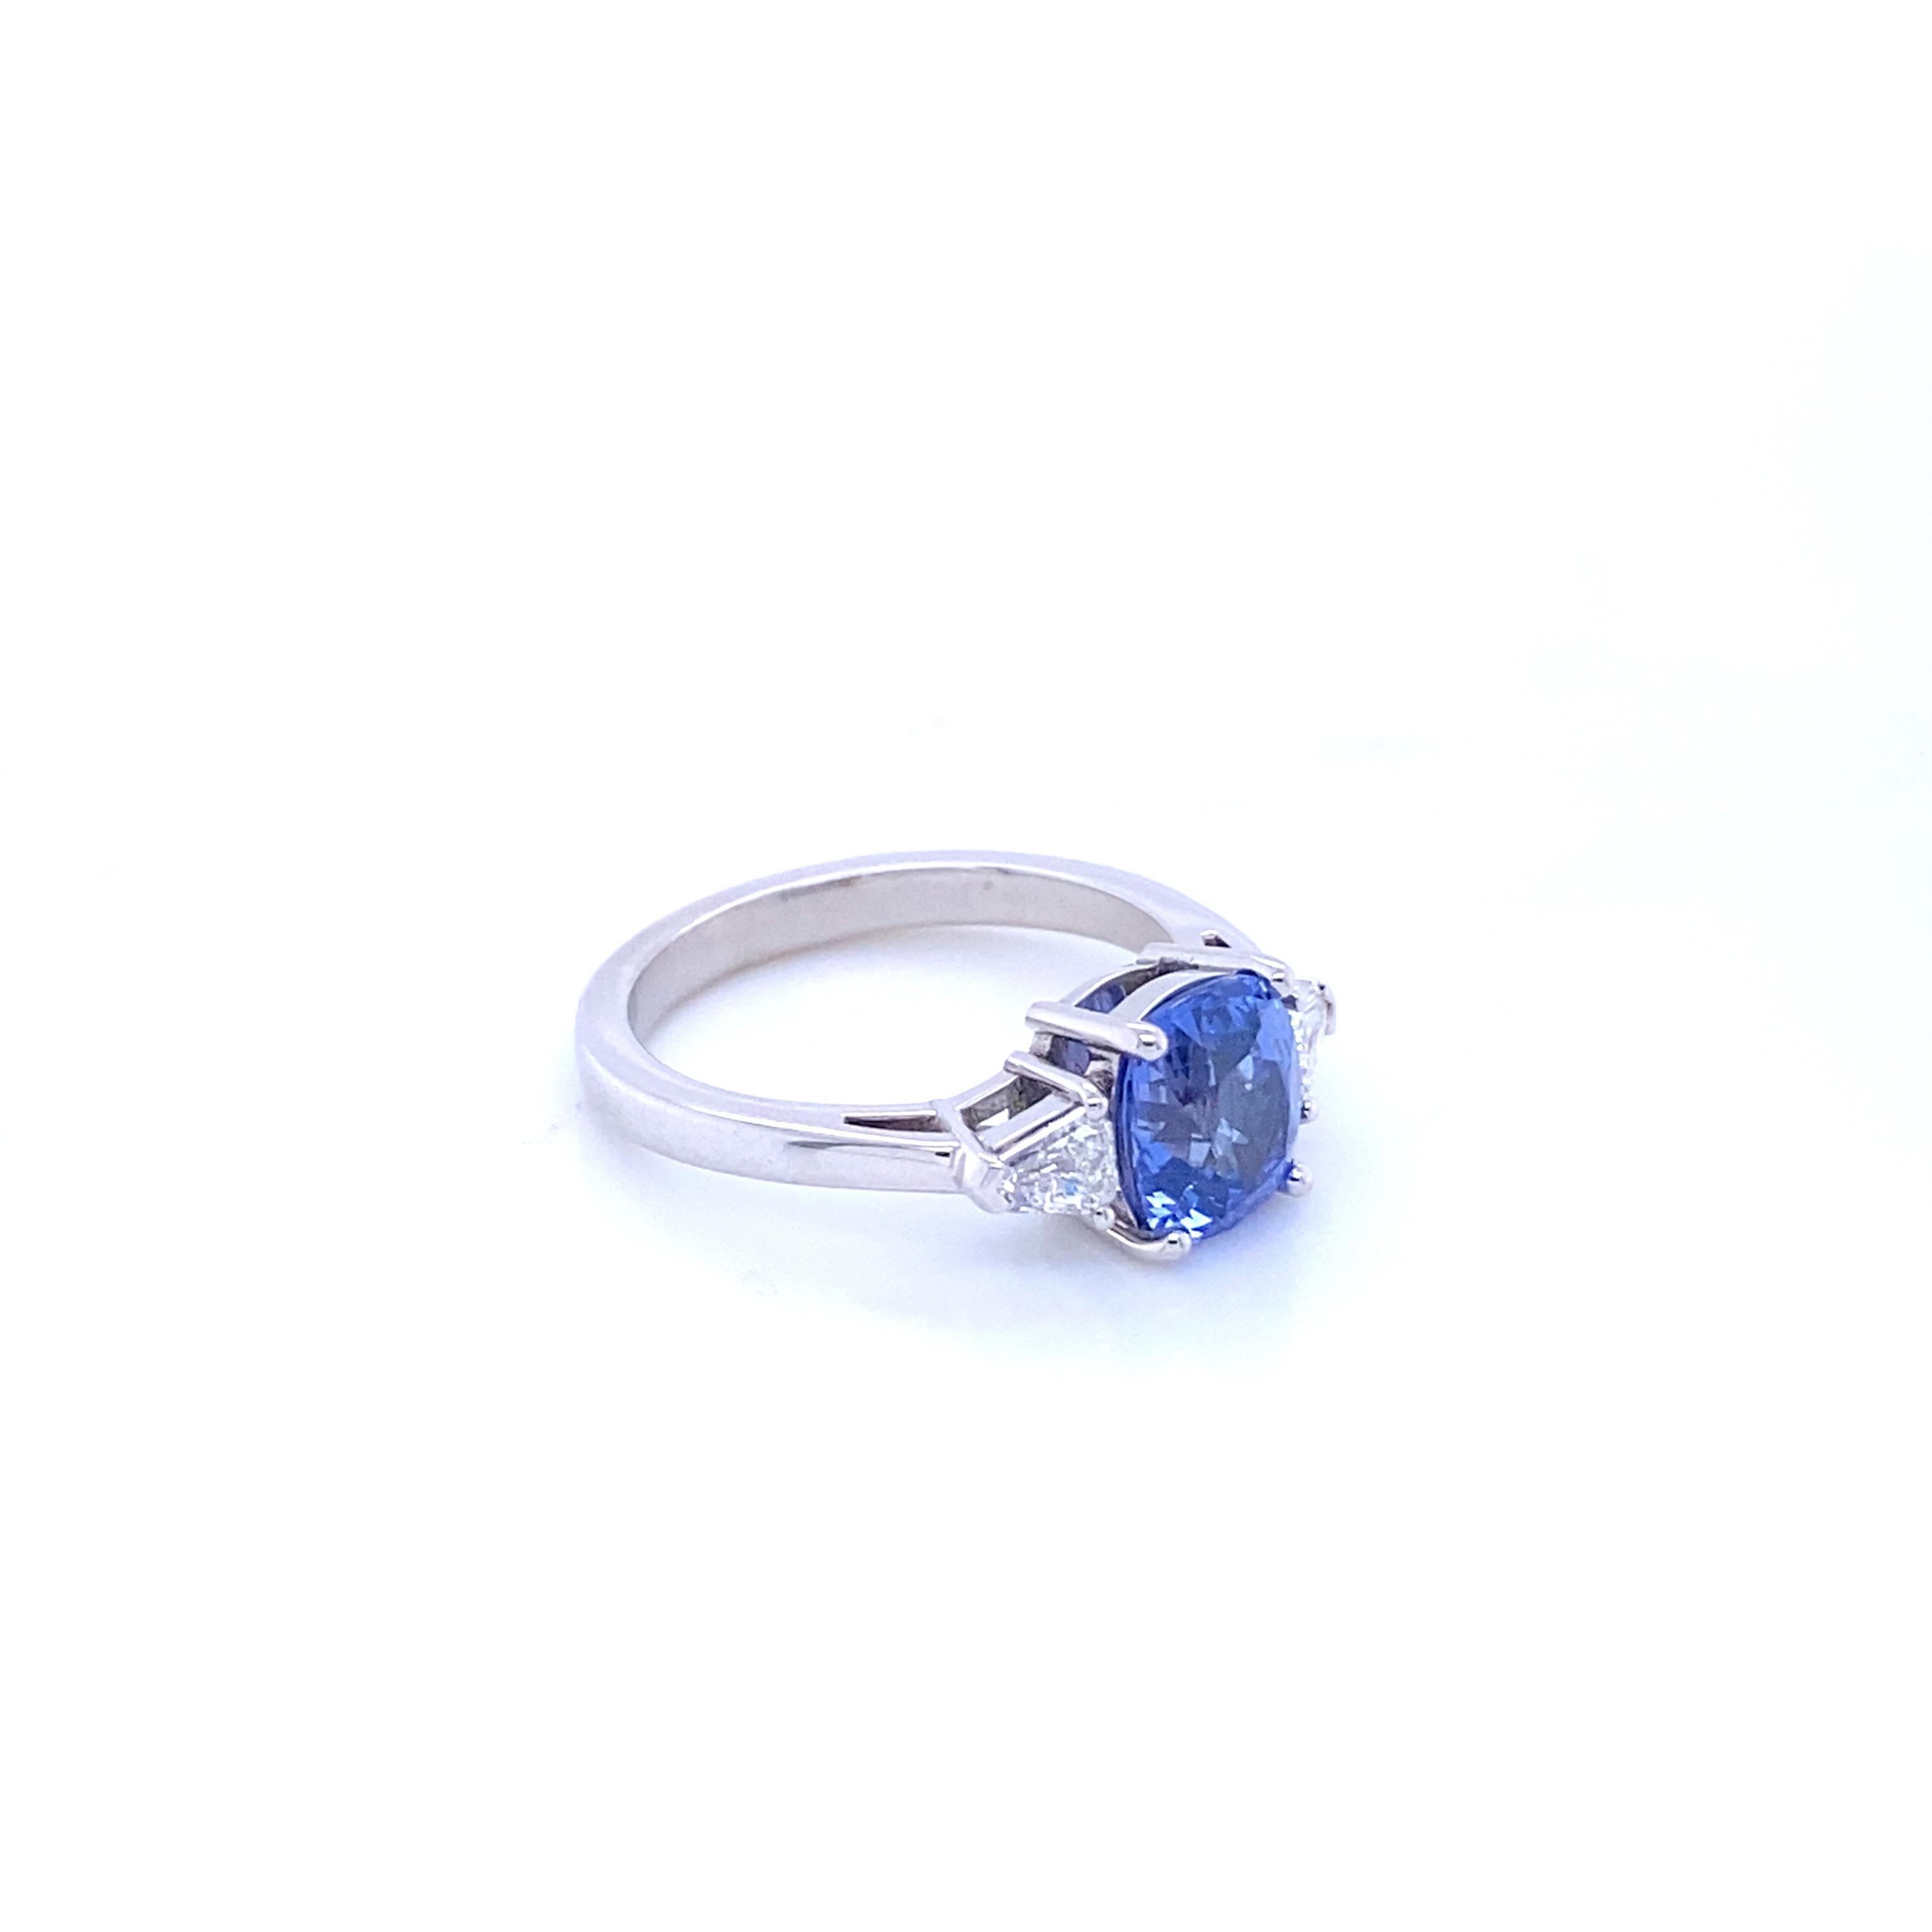 Engagement Ring in White Gold with a Ceylan Sapphire and Diamonds
French Collection by Mesure et Art du Temps.

Engagement ring in 18 Carat white gold surmounted by a cushion-cut blue sapphire ceylan which weighs 2.54 Carat. This ring is surmounted